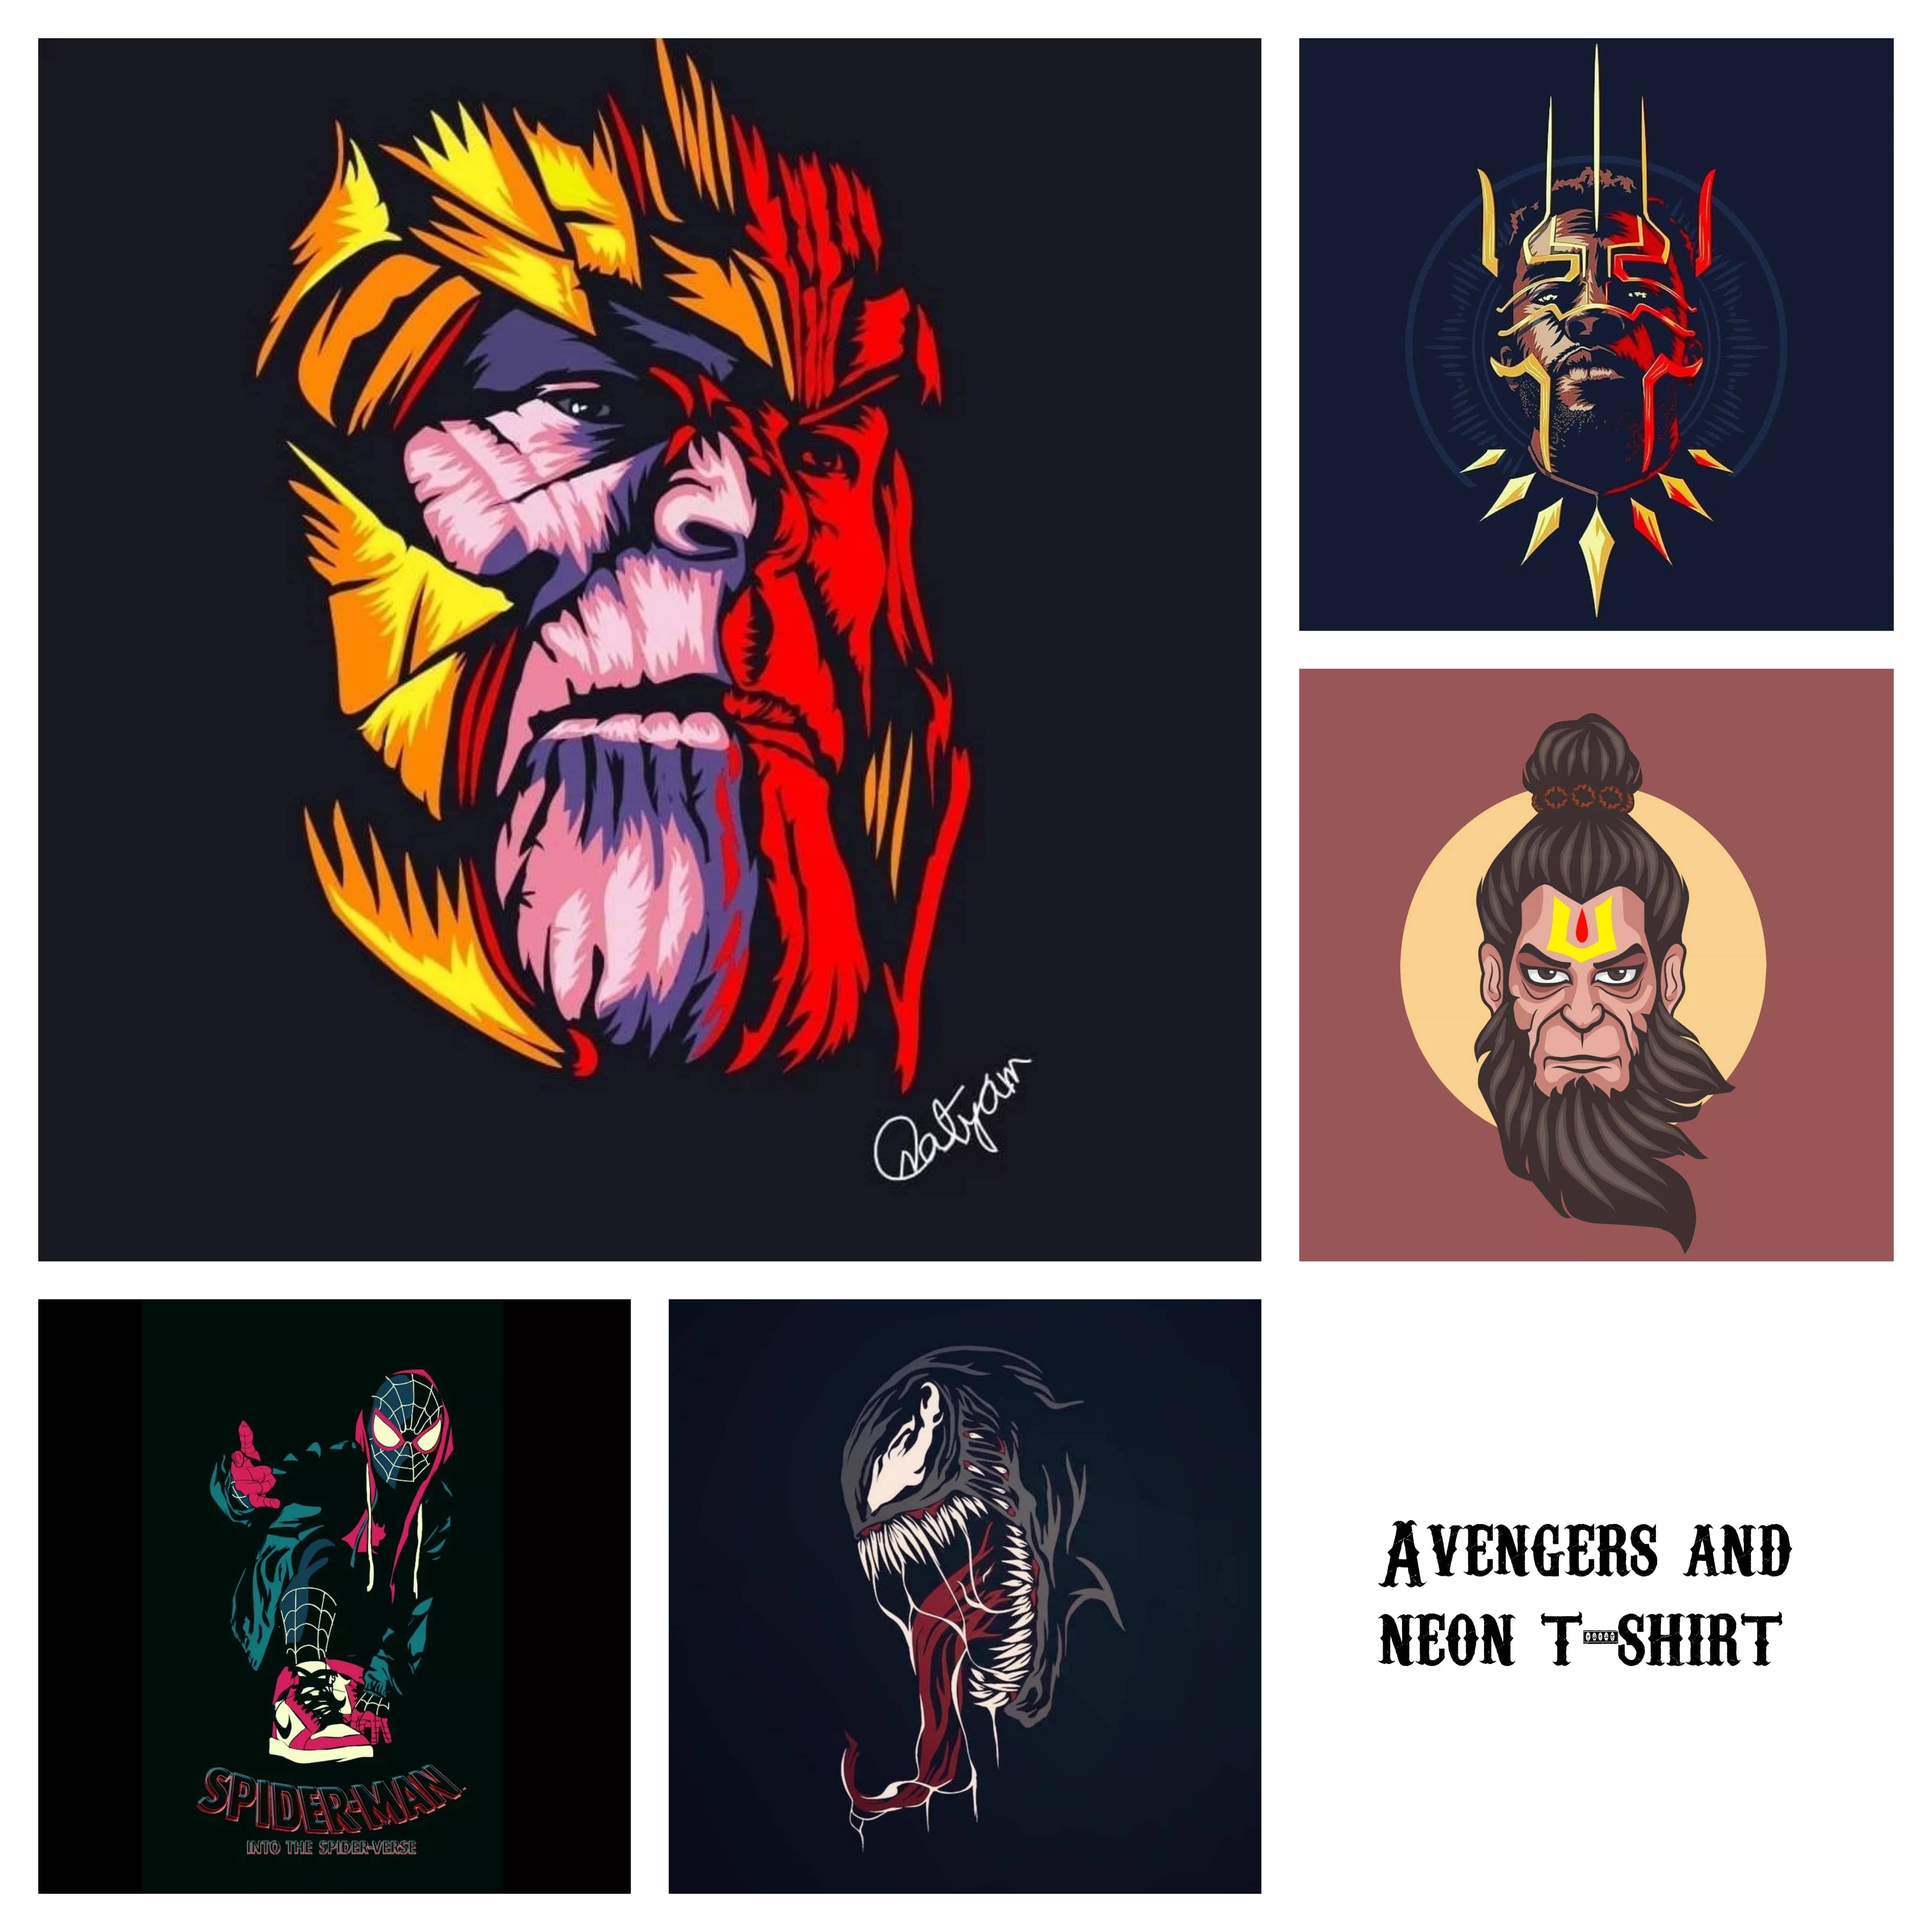 Avengers and neon t-shirt cover image.